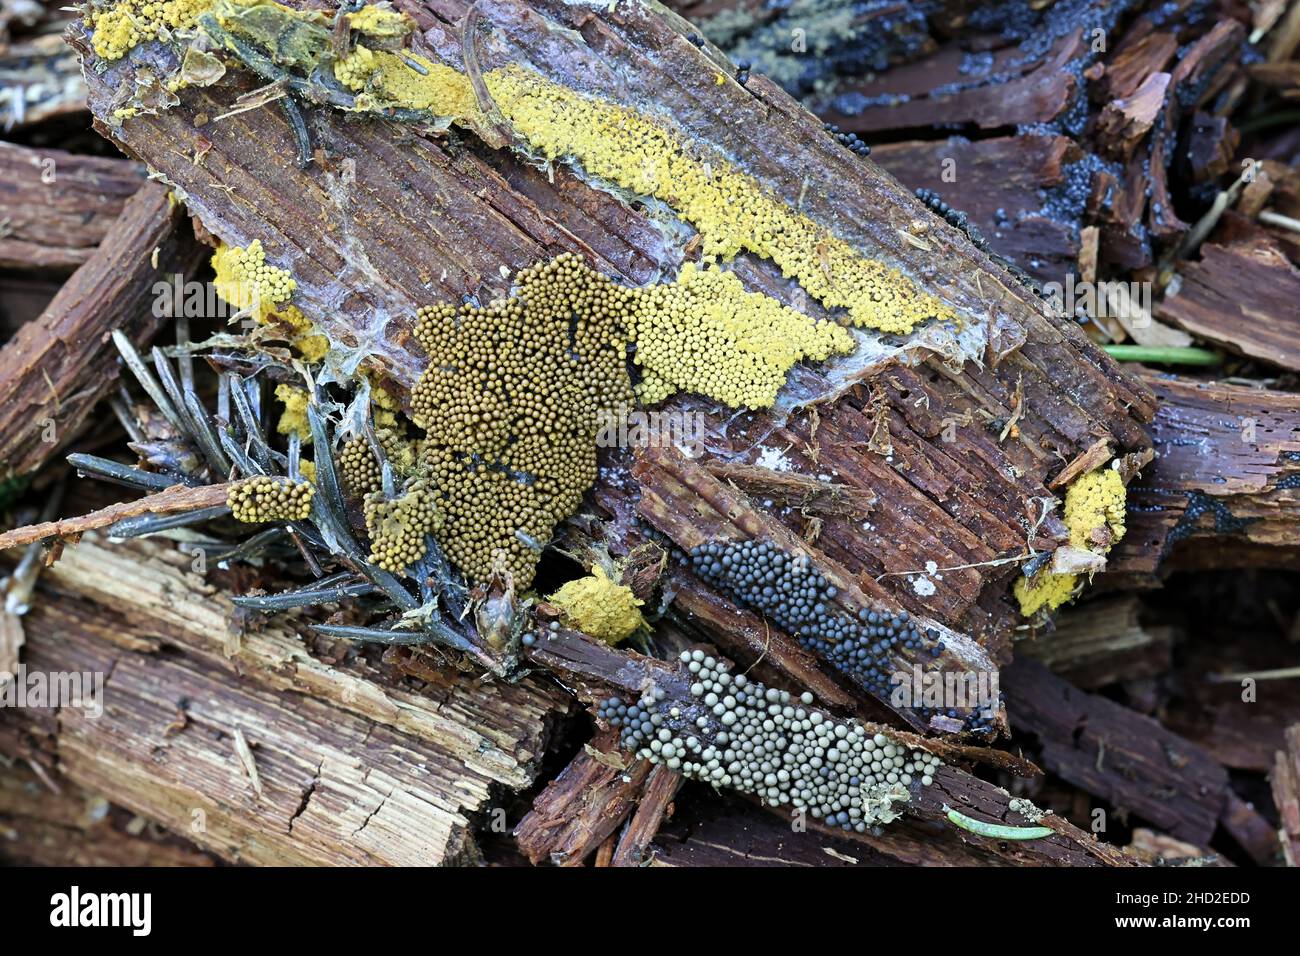 Trichia favoginea and Cribraria argillacea, two slime mold species from Finland side-by-side on decaying spruce log Stock Photo